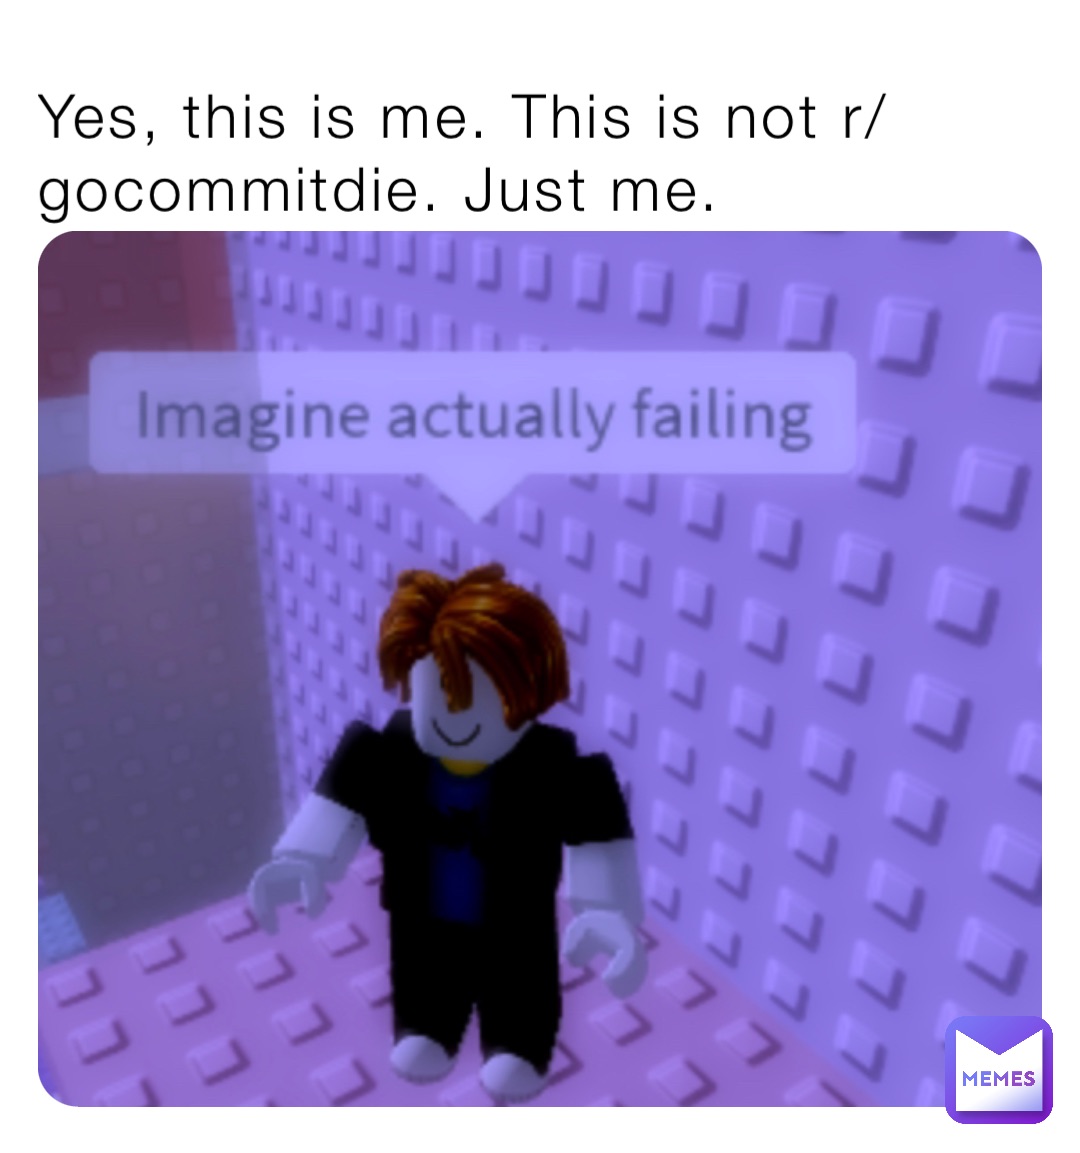 Yes, this is me. This is not r/gocommitdie. Just me.